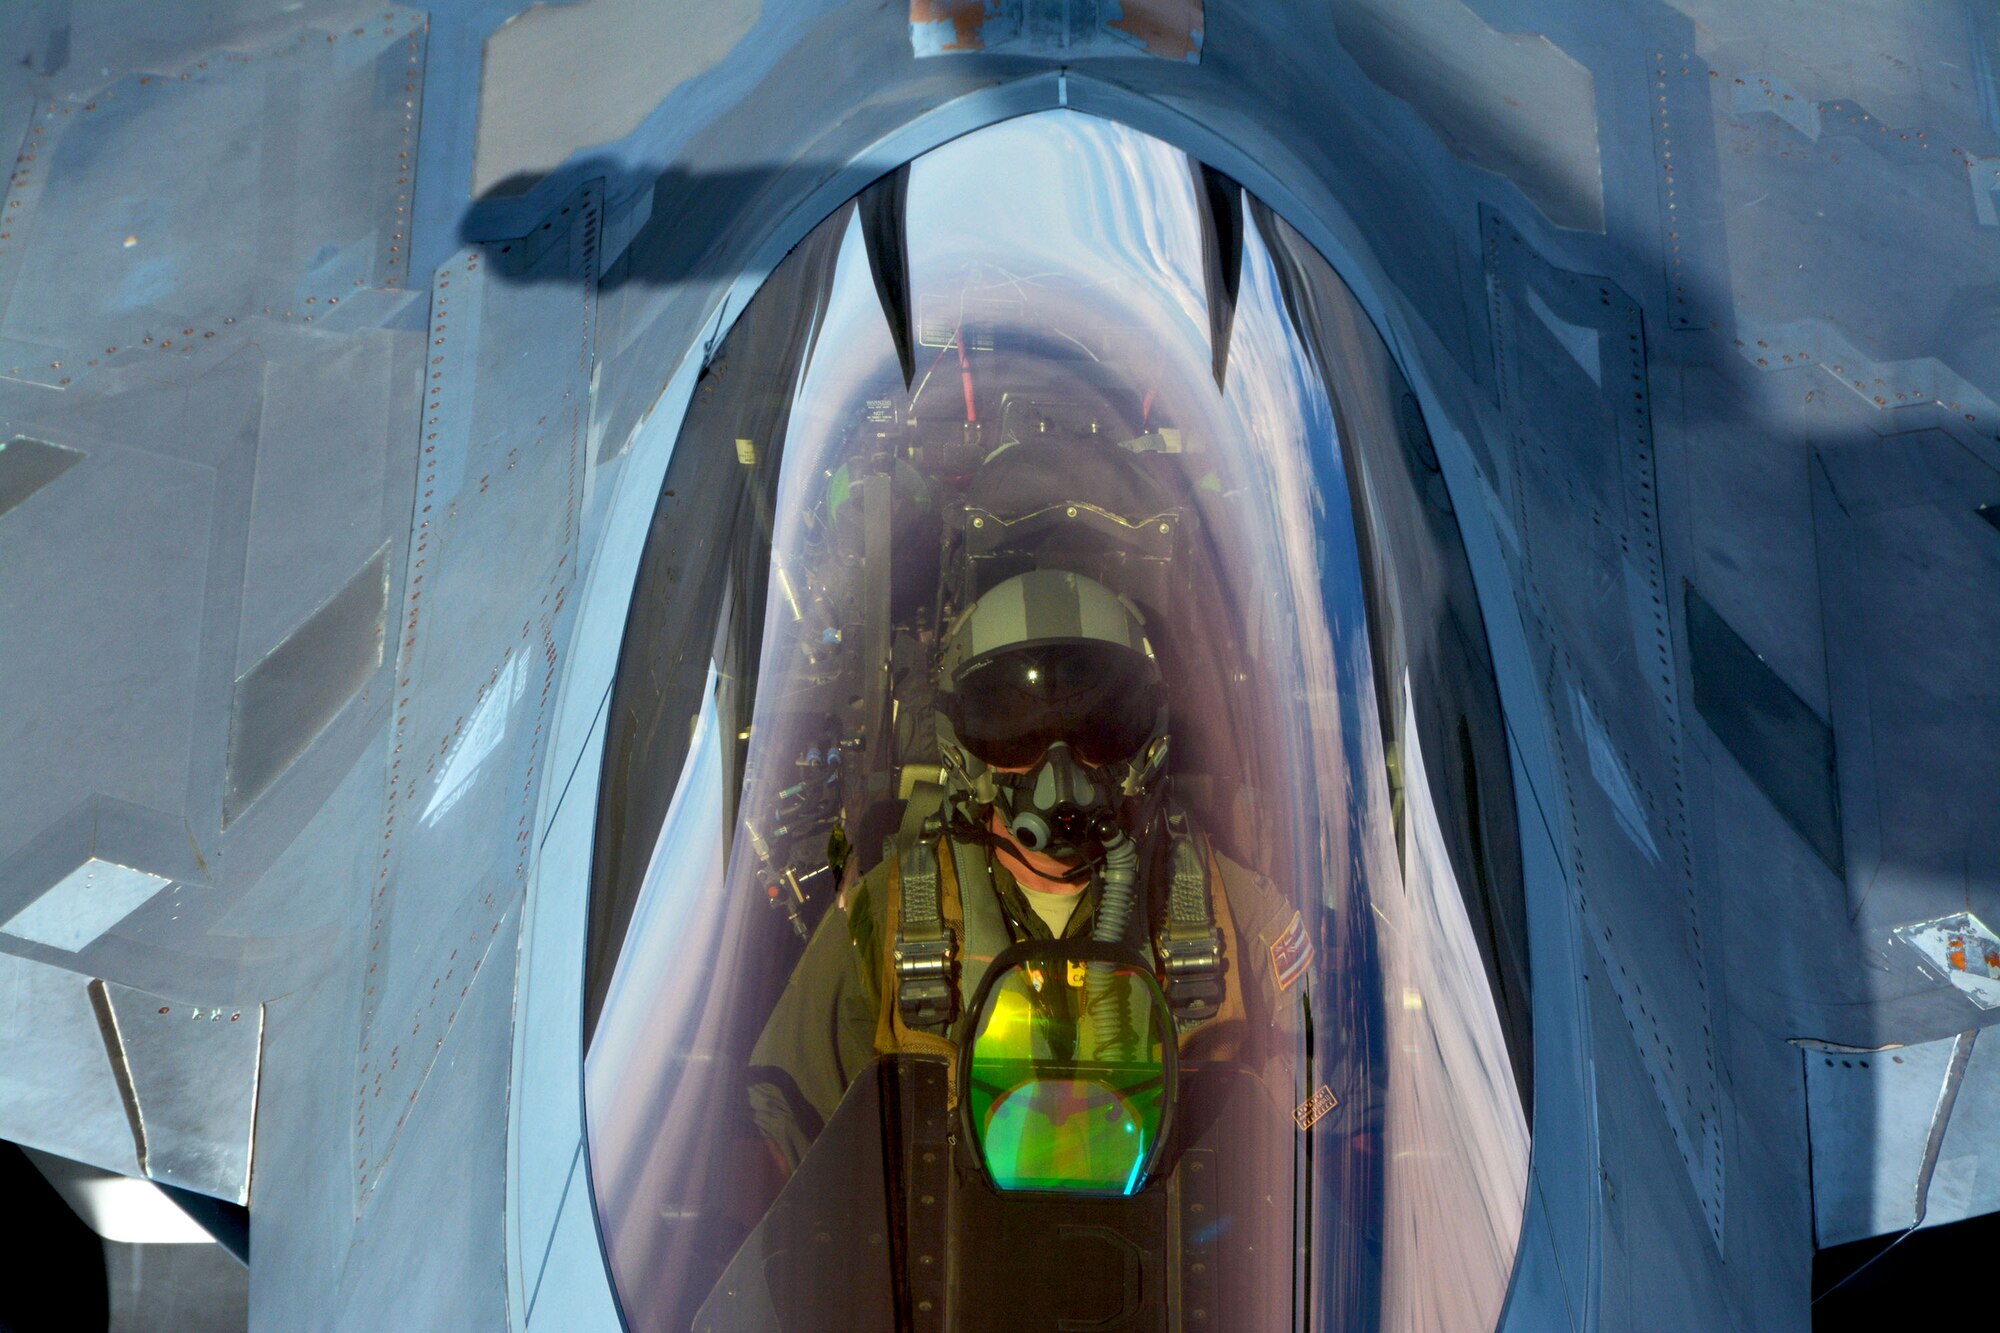 A 154th Wing Hawaii Air National Guard F-22 Raptor pilot performs in-flight refueling with a 434th Air Refueling Wing KC-135 Stratotanker from Grissom Air Reserve Base, Indiana, near Hawaii during the Rim of the Pacific (RIMPAC) exercise July 17. Twenty-five nations, 46 ships, five submarines, and about 200 aircraft and 25,000 personnel are participating in RIMPAC from June 27 to Aug. 2 in and around the Hawaiian Islands and Southern California. The world’s largest international maritime exercise, RIMPAC provides a unique training opportunity while fostering and sustaining cooperative relationships among participants critical to ensuring the safety of sea lanes and security of the world’s oceans. RIMPAC 2018 is the 26th exercise in the series that began in 1971. (U.S. Air Force photo by Tech. Sgt. Samantha Mathison)